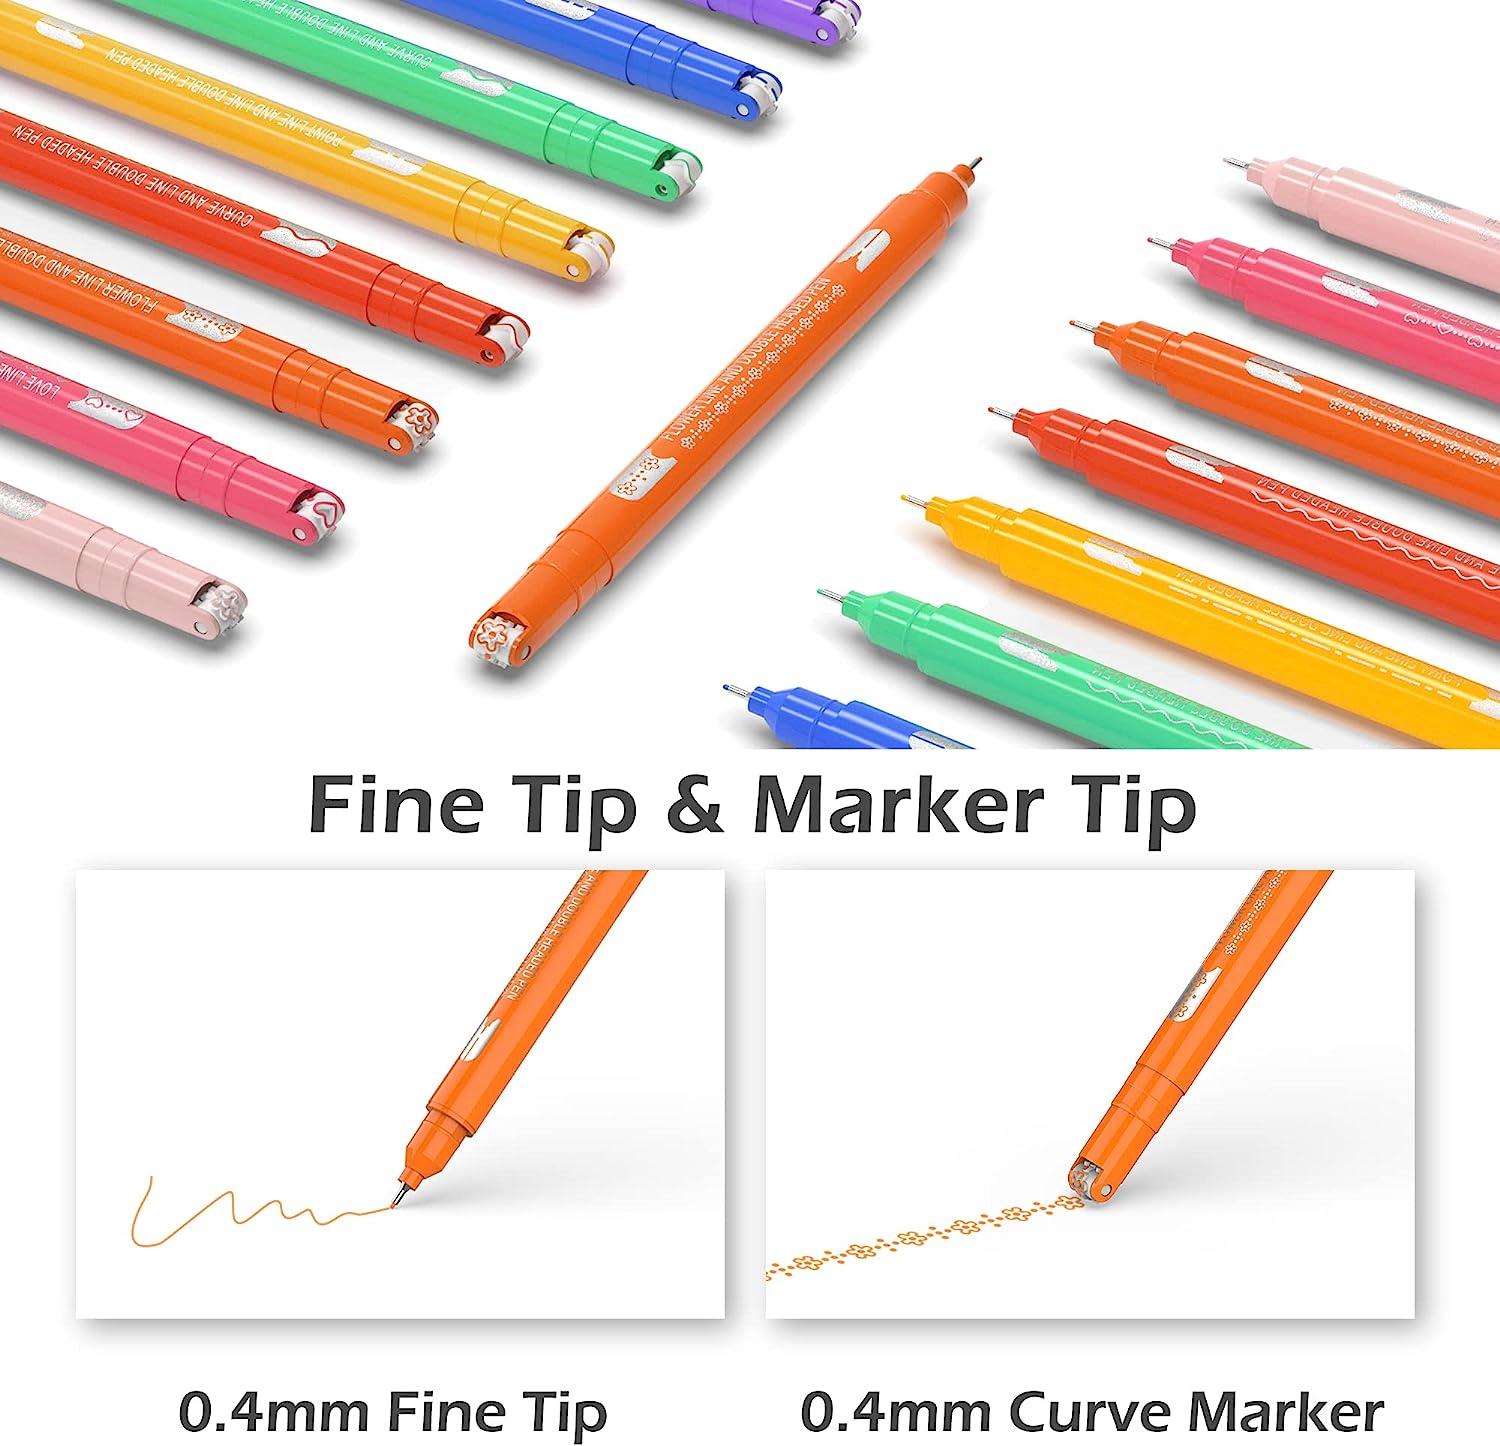 Metallic Colors Journal Planner Pens Colorful 0.5mm Markers Fine Tip Drawing Pen Porous Fineliner Pen for Bullet Journaling Writing Note Taking